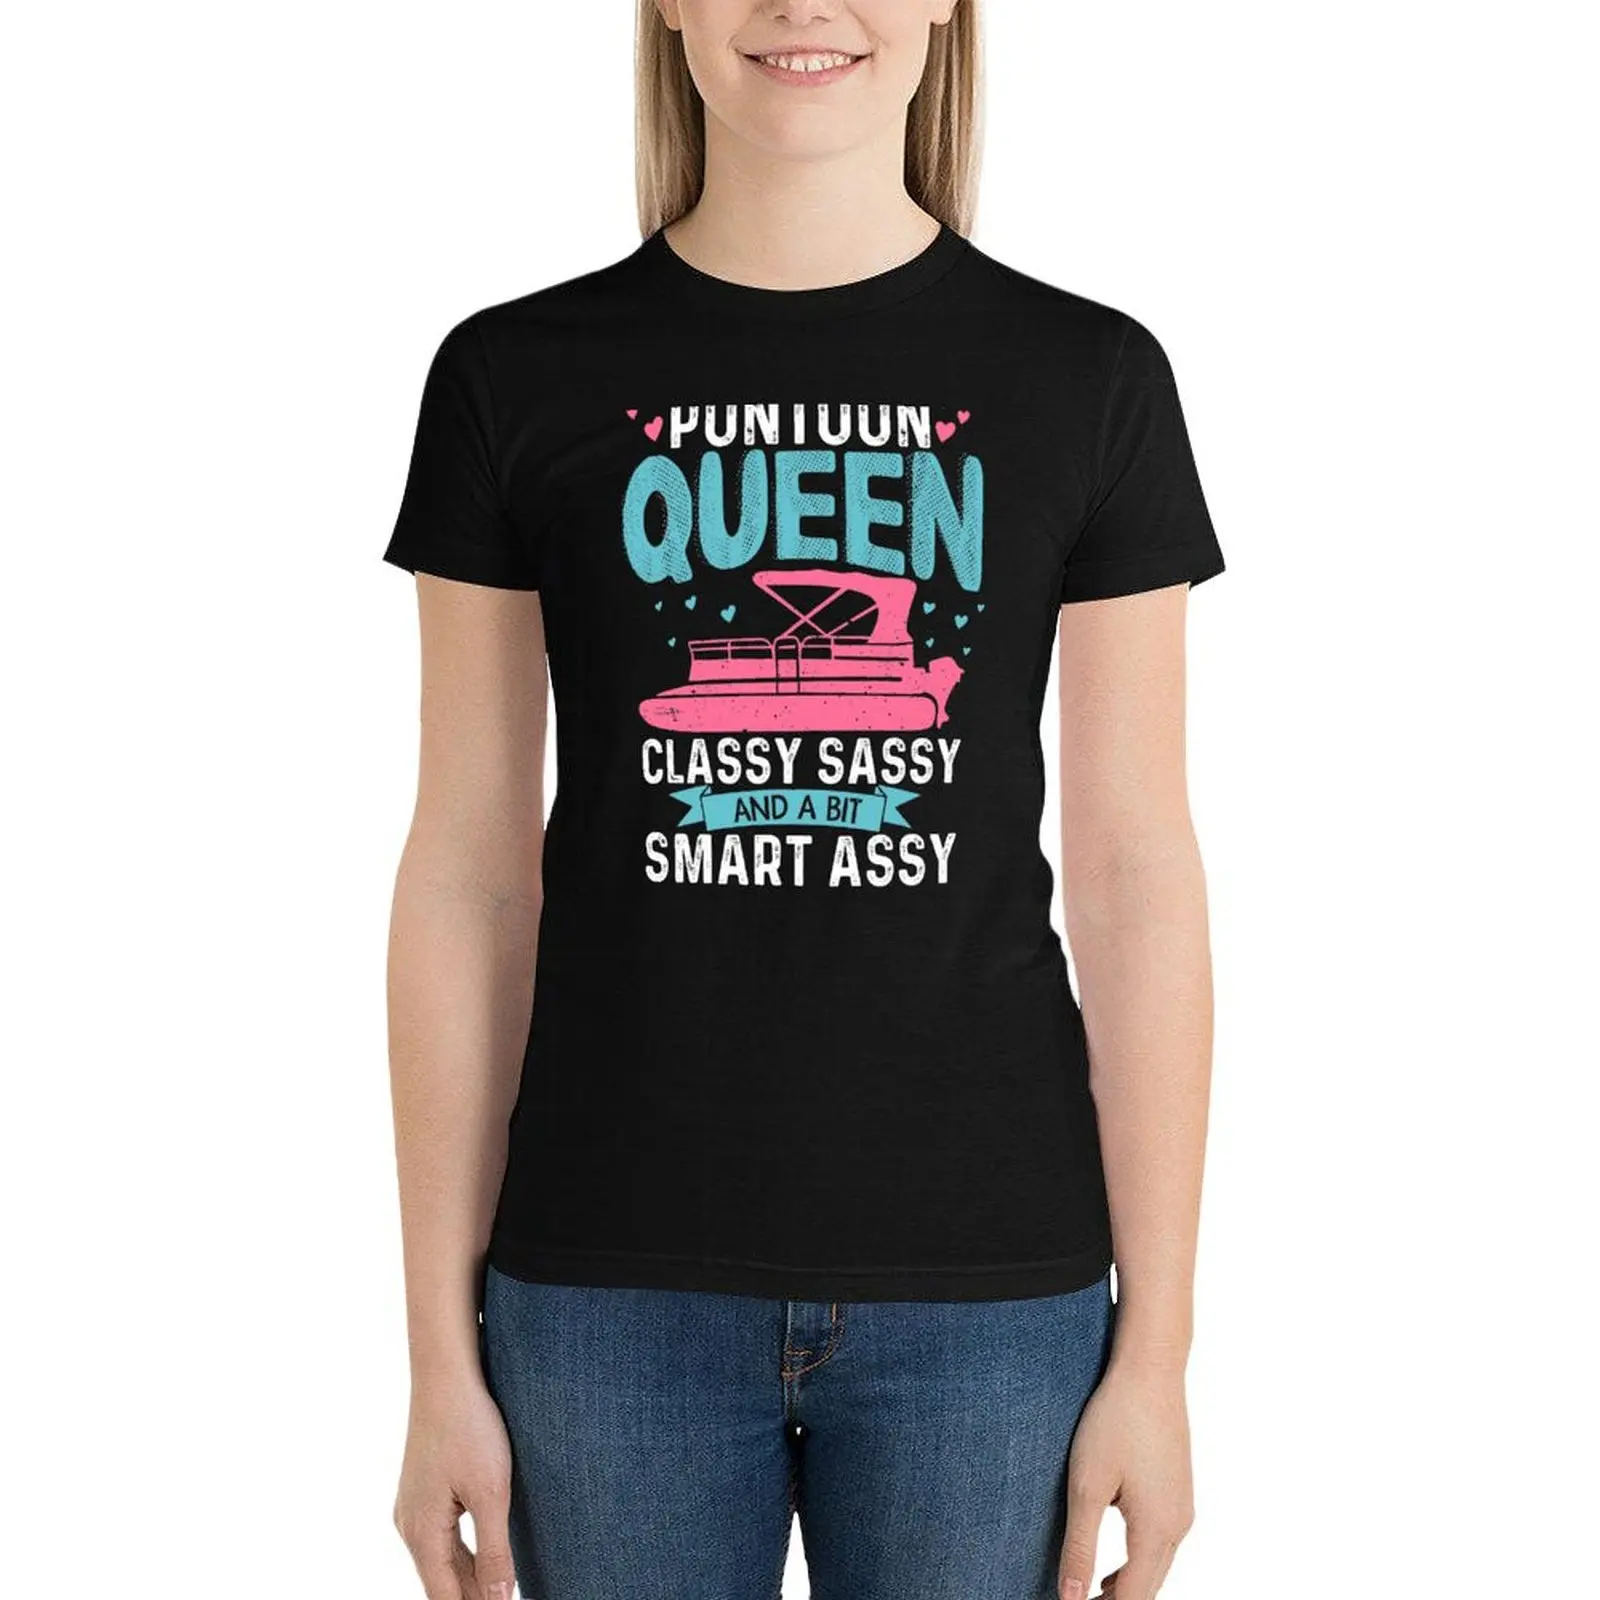 

Pontoon Queen Classy Sassy and A Bit Smart Assy Funny Pontooning Gift for Women T-Shirt quick-drying clothes for woman